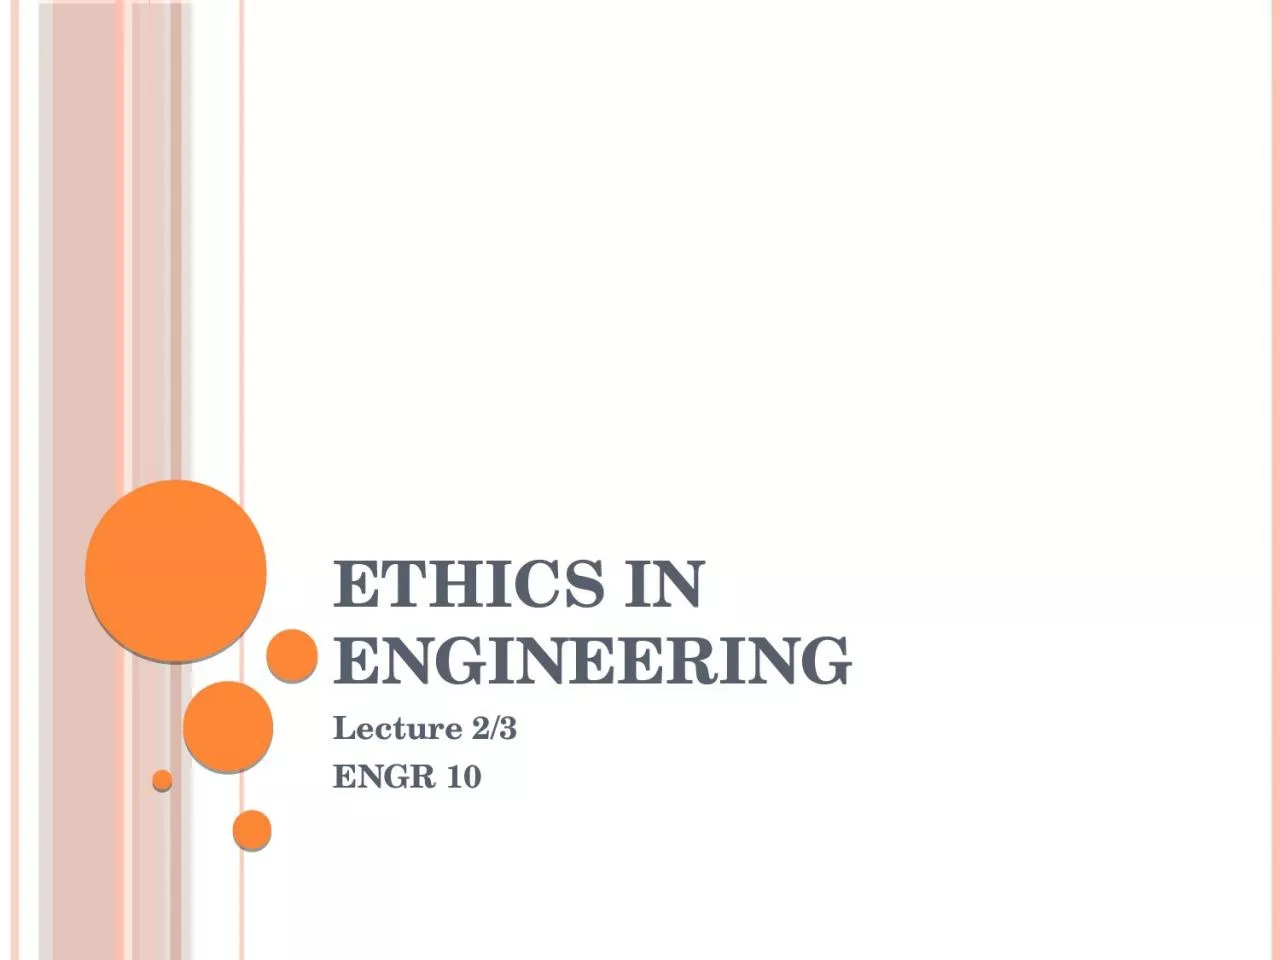 Ethics in Engineering Lecture 2/3